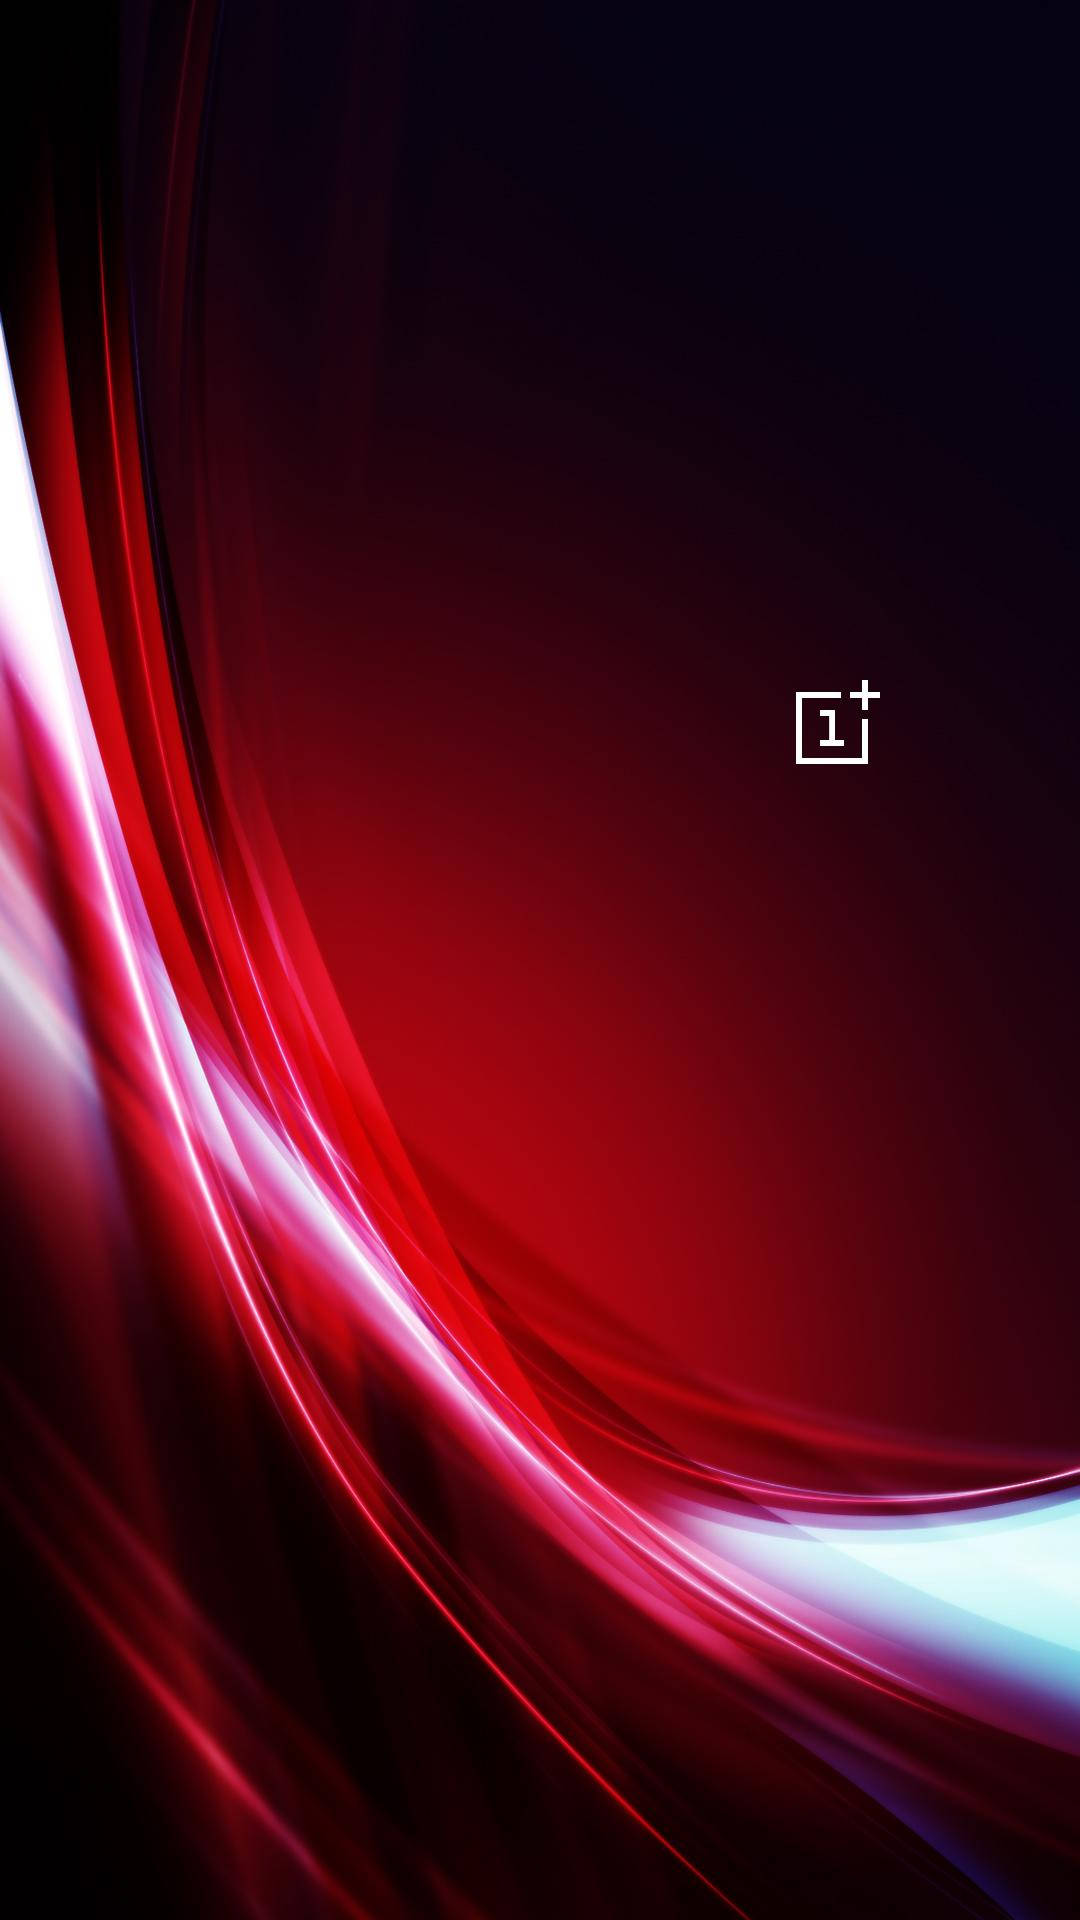 Exquisite Oneplus Red Gradient. Oneplus Gradient In Its Authentic Scarlet Red.